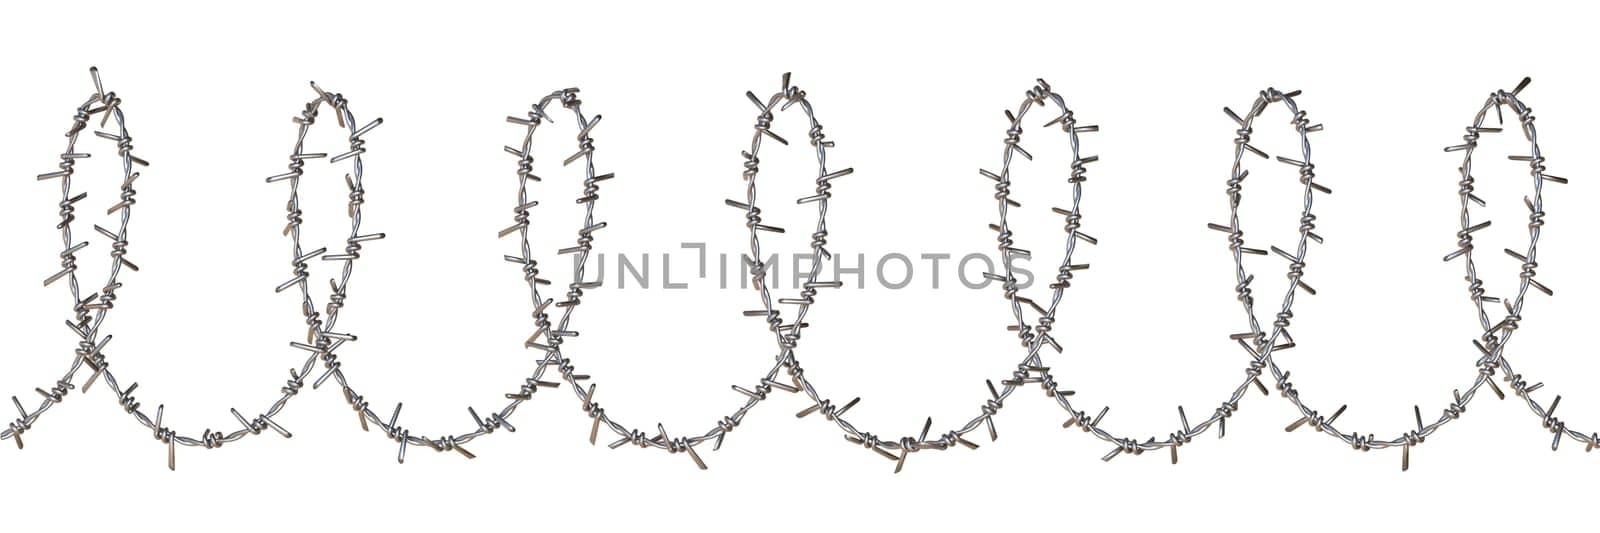 Barbed wire fence 3D by djmilic